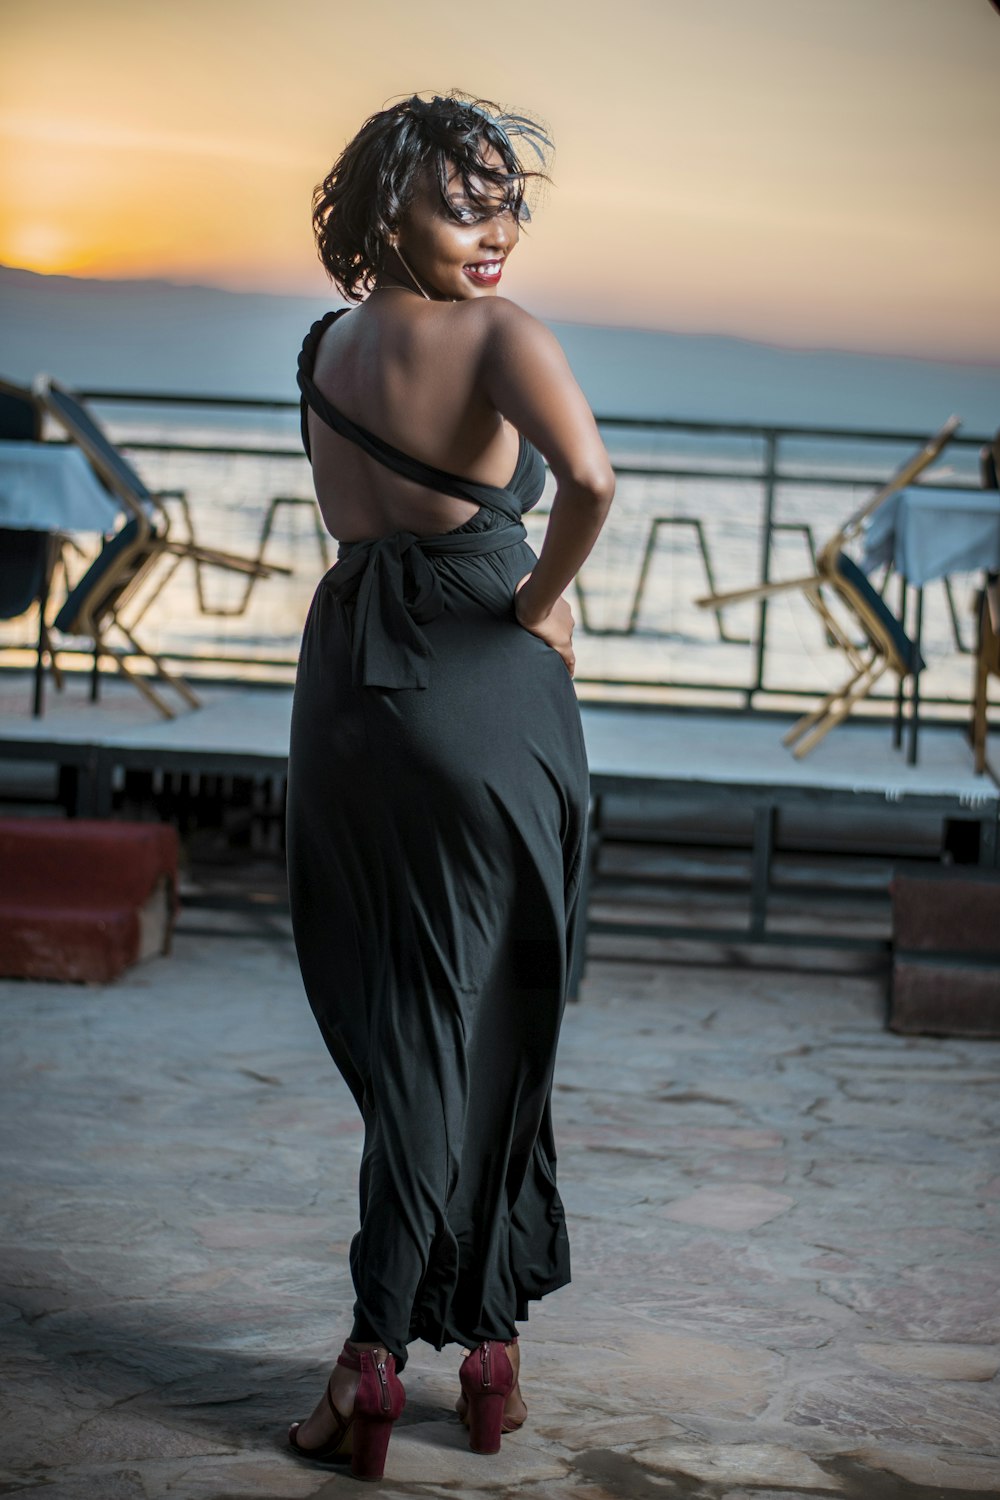 a woman in a black dress standing on a pier